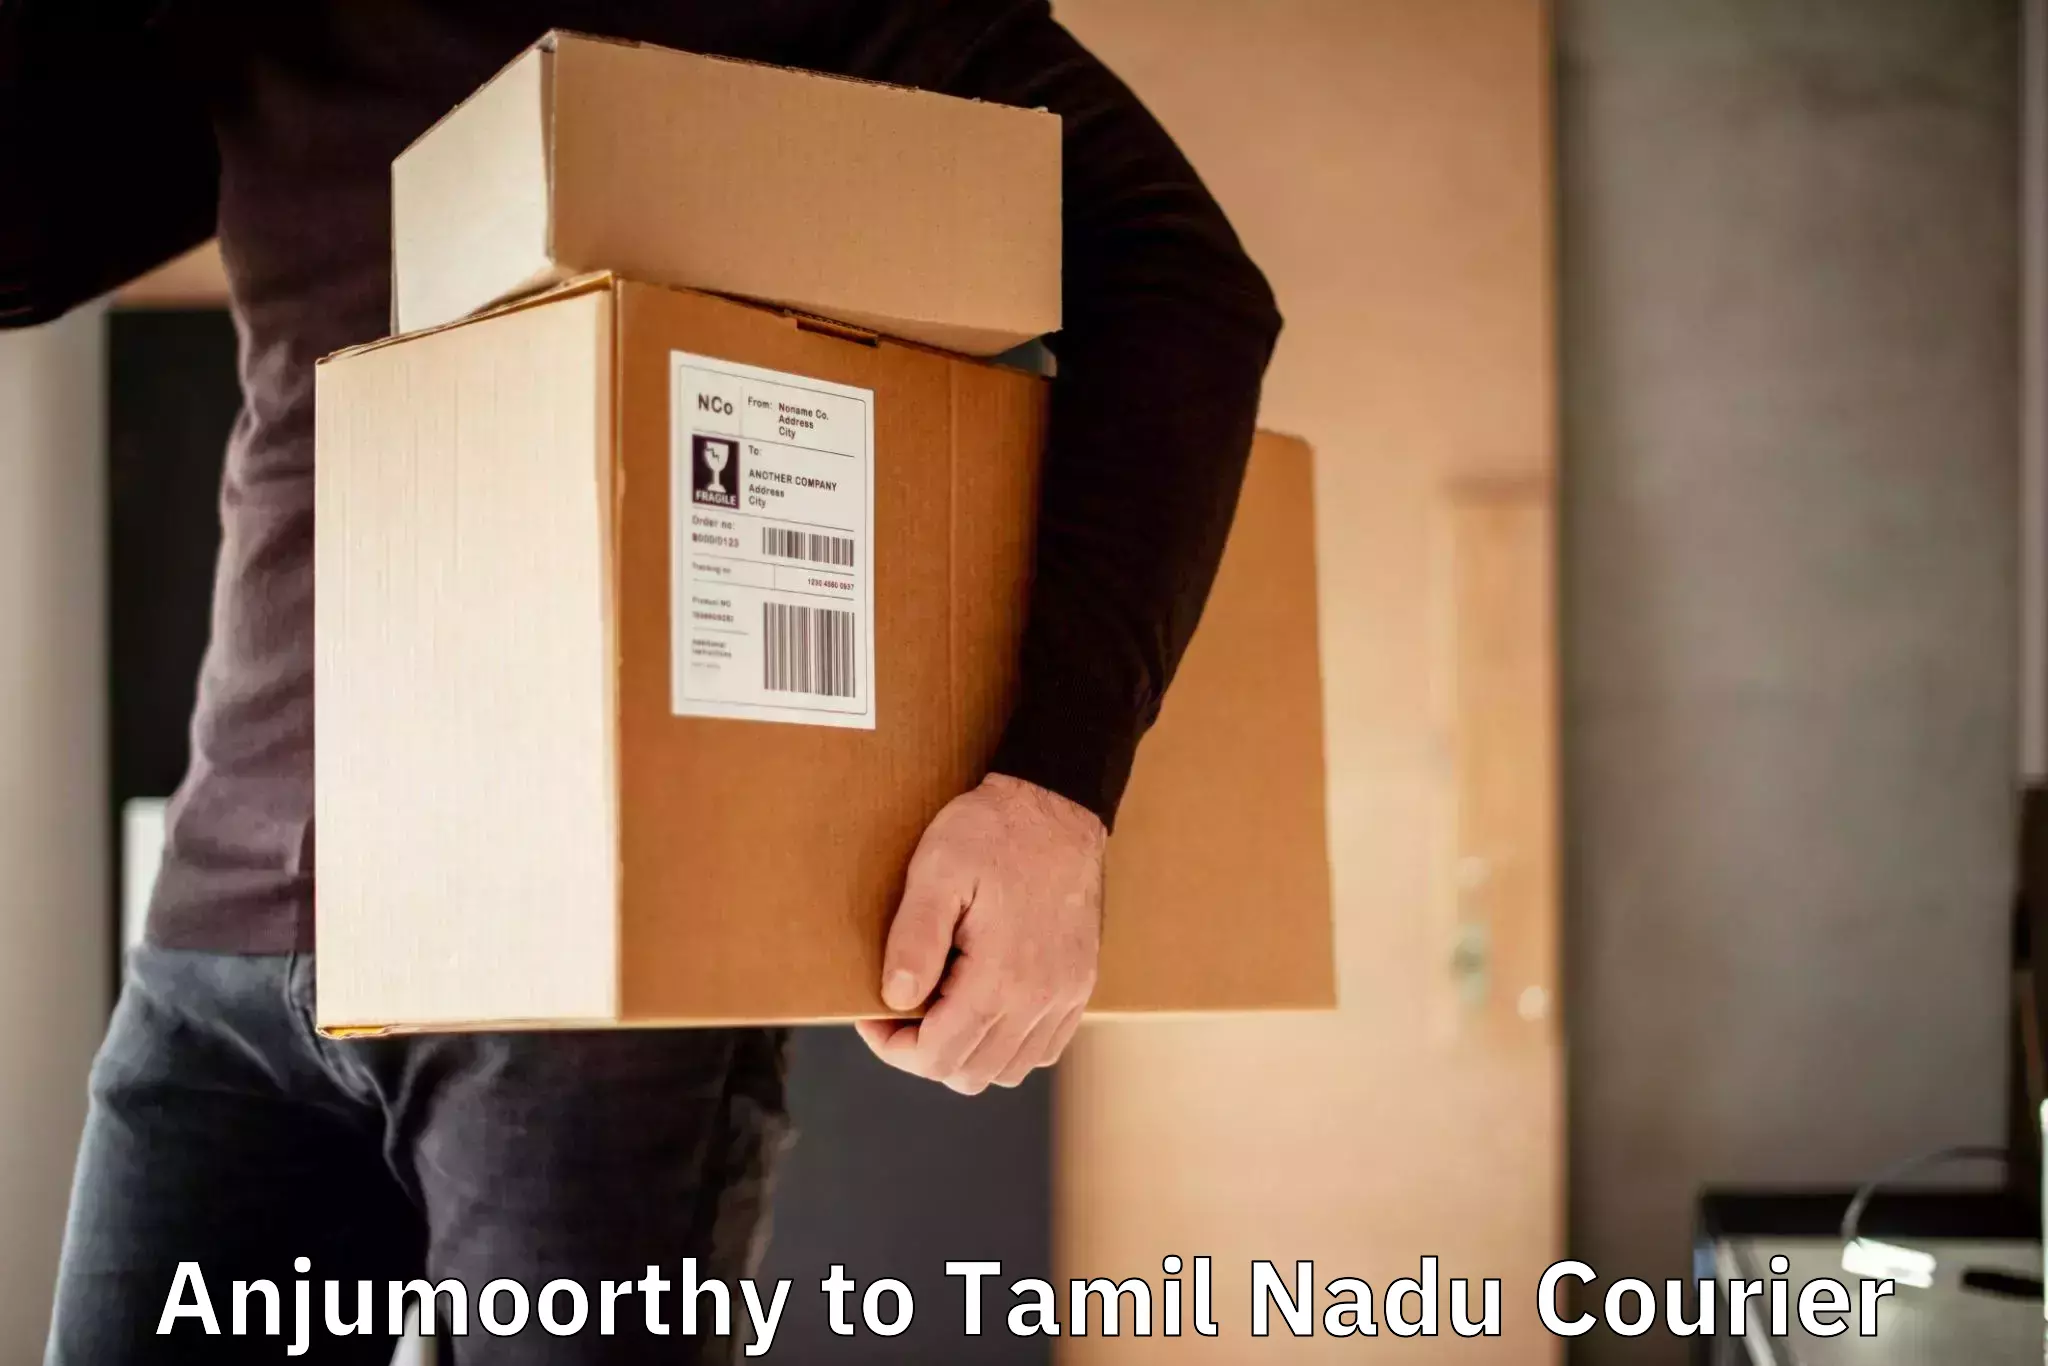 Pharmaceutical courier Anjumoorthy to Ennore Port Chennai